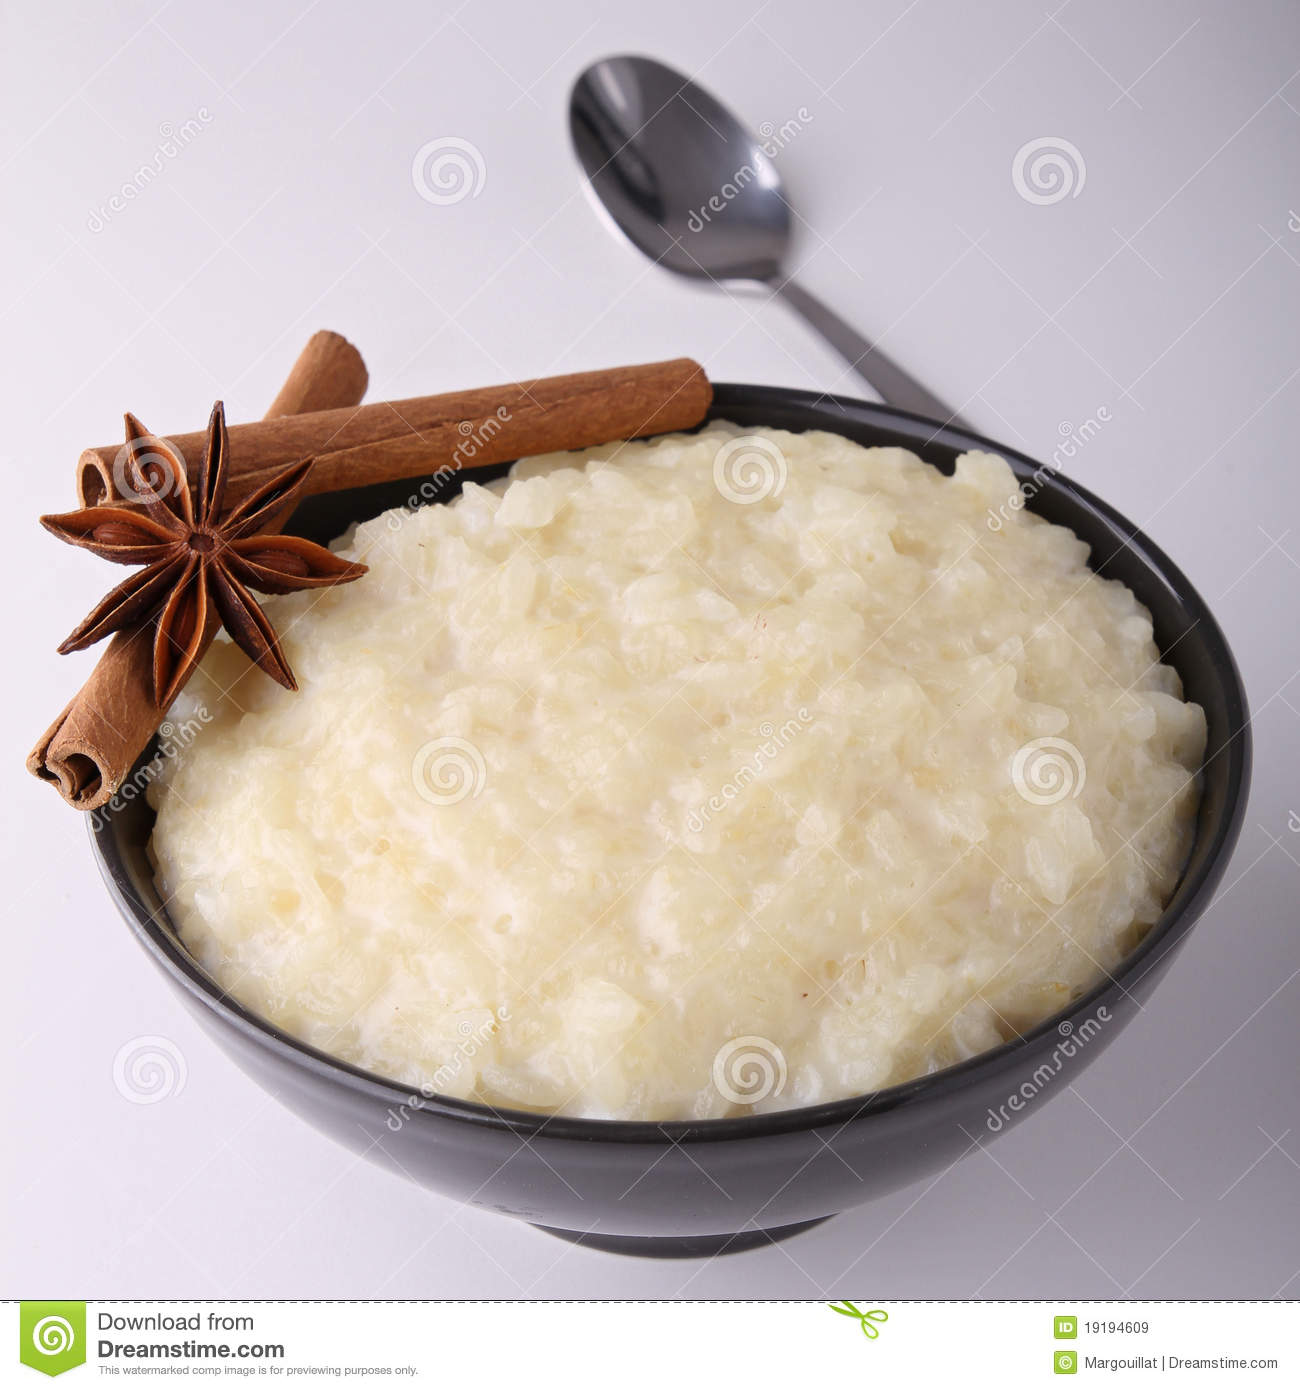 Rice Pudding Royalty Free Stock Images   Image  19194609